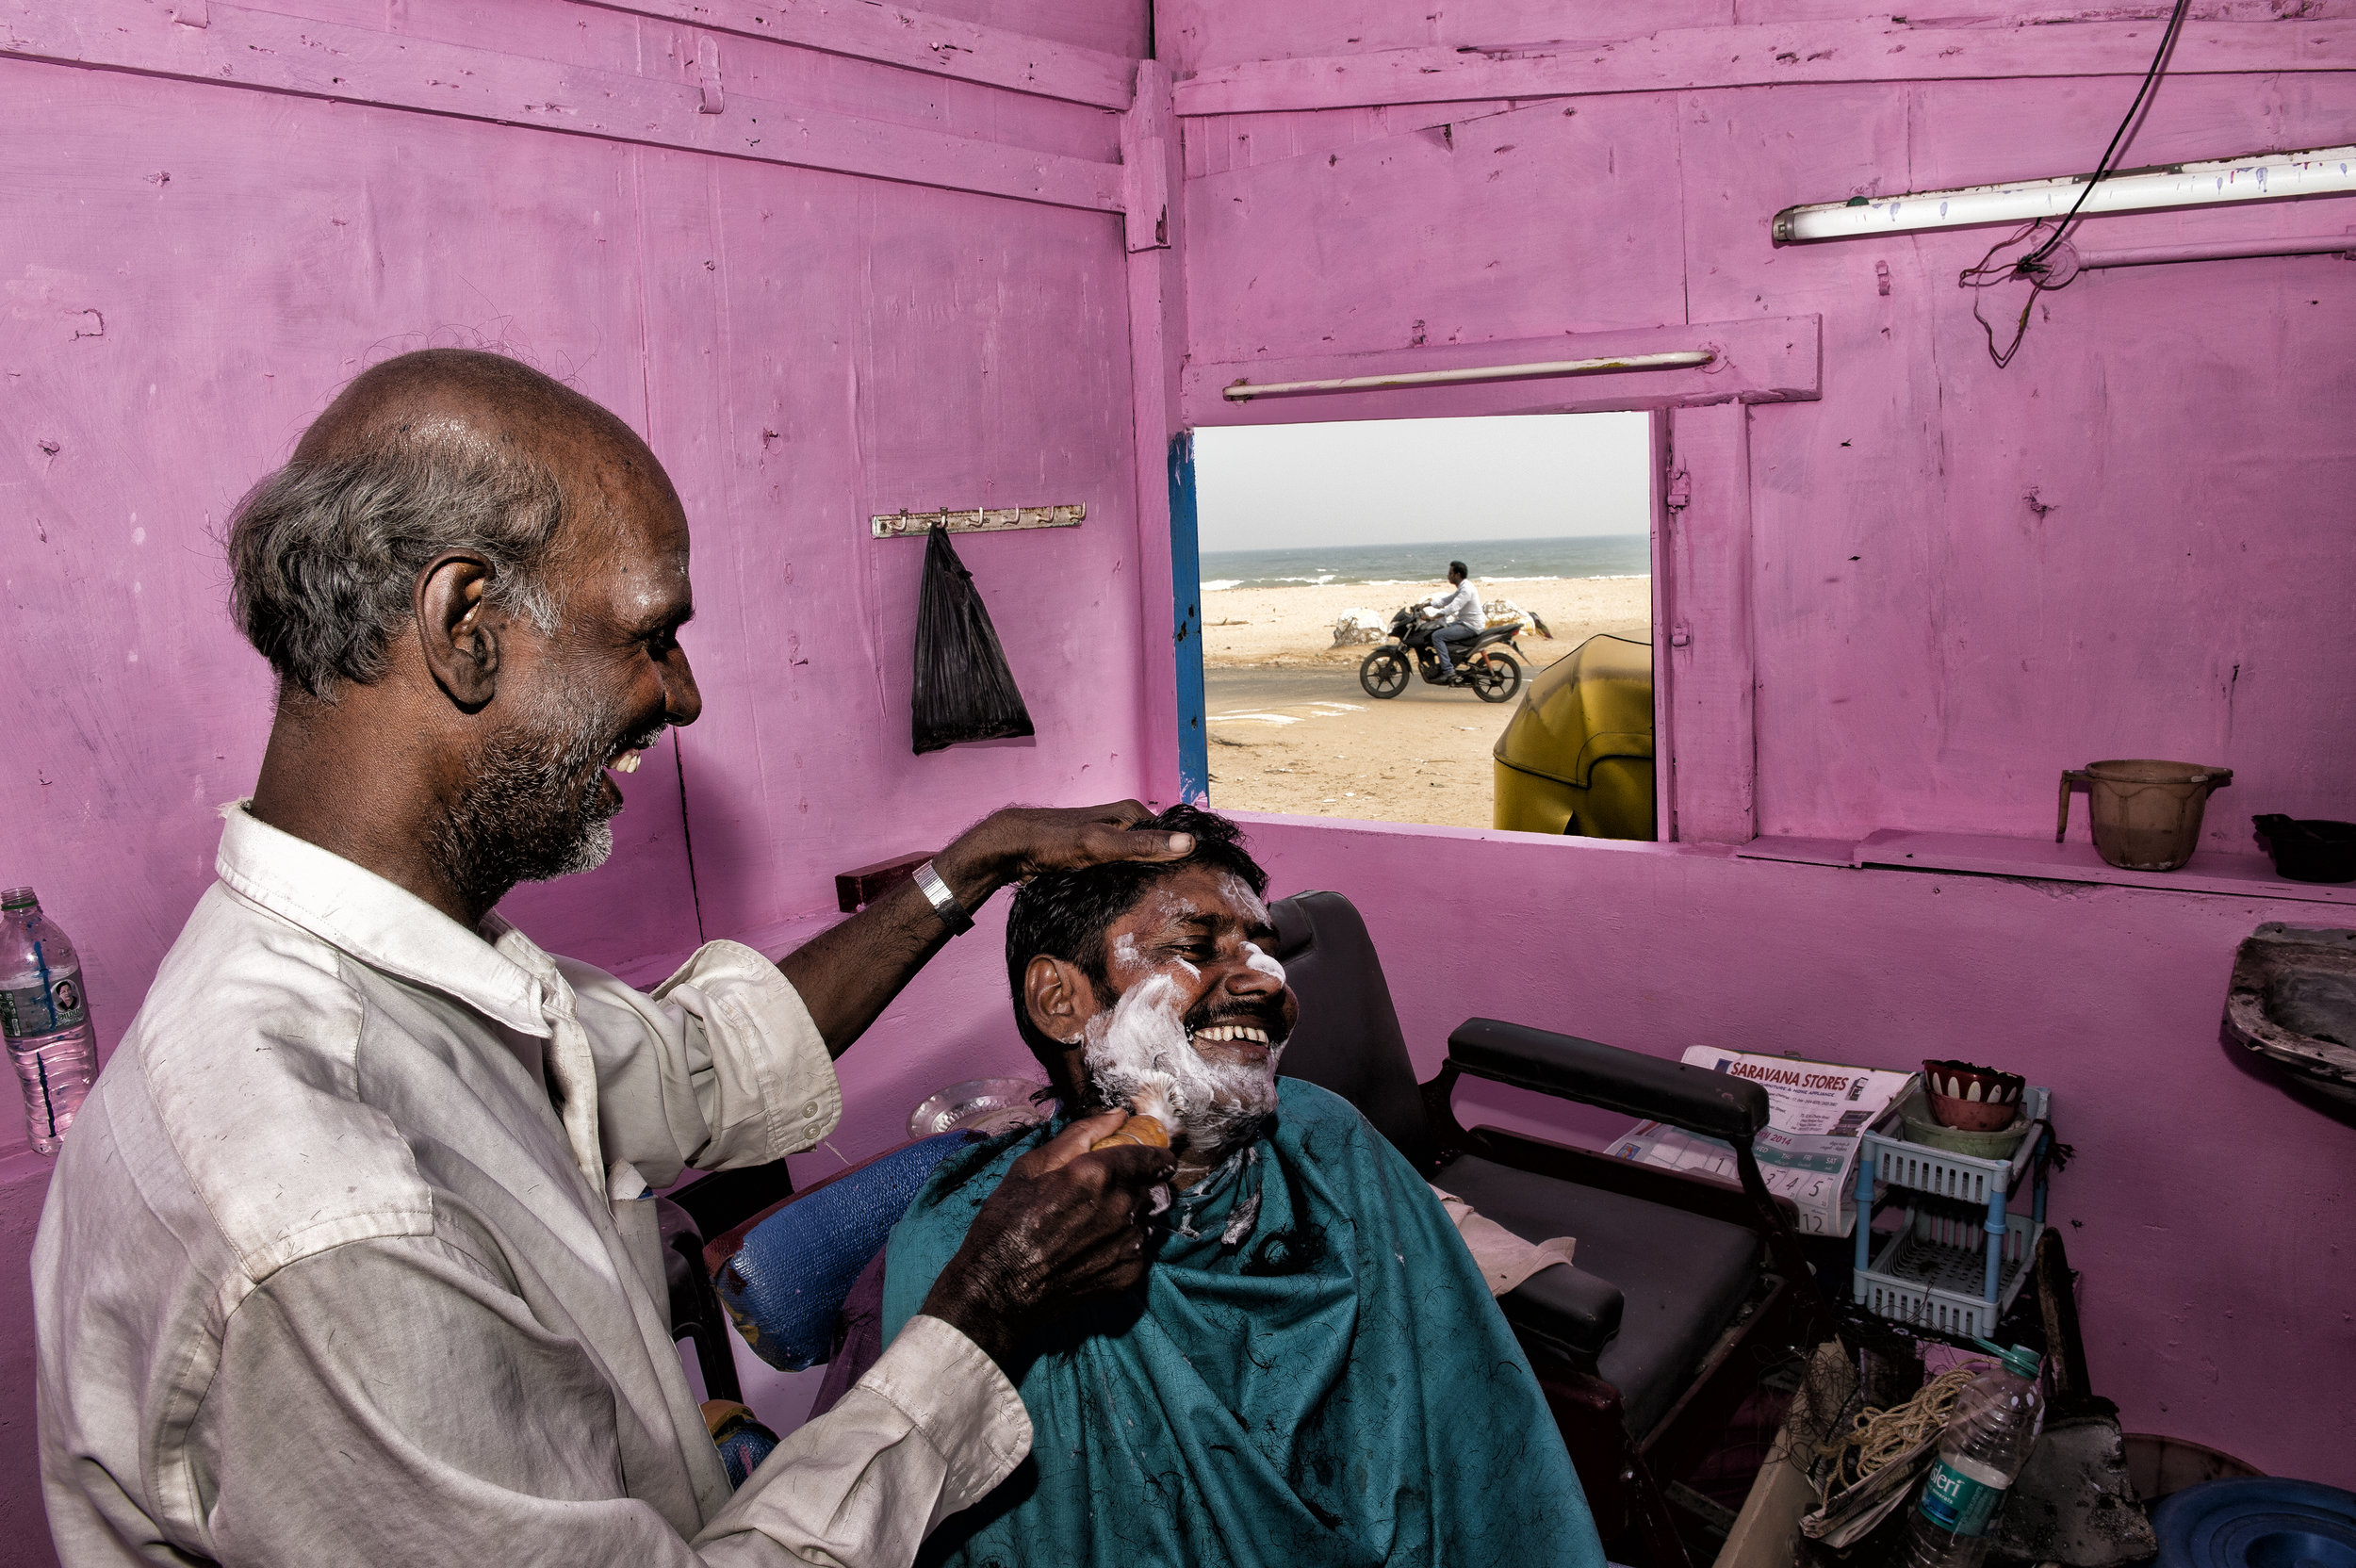 Hairdresser on the beach in India for National Geographic